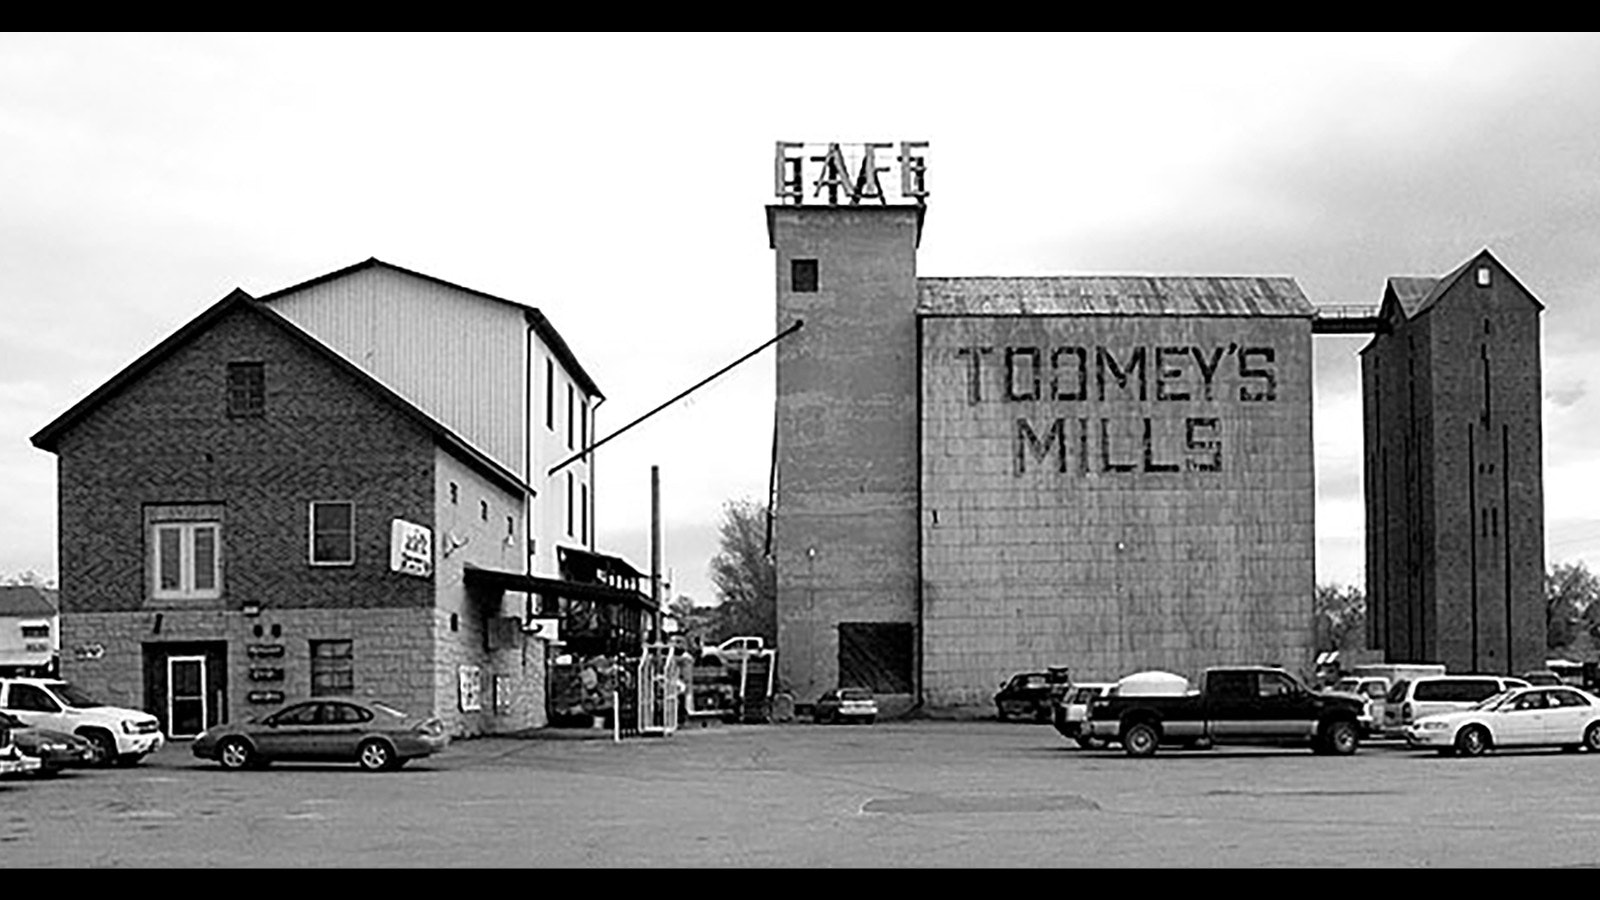 Toomey's Flour Mill was a Newcastle landmark for 60 years before it closed in 1965.